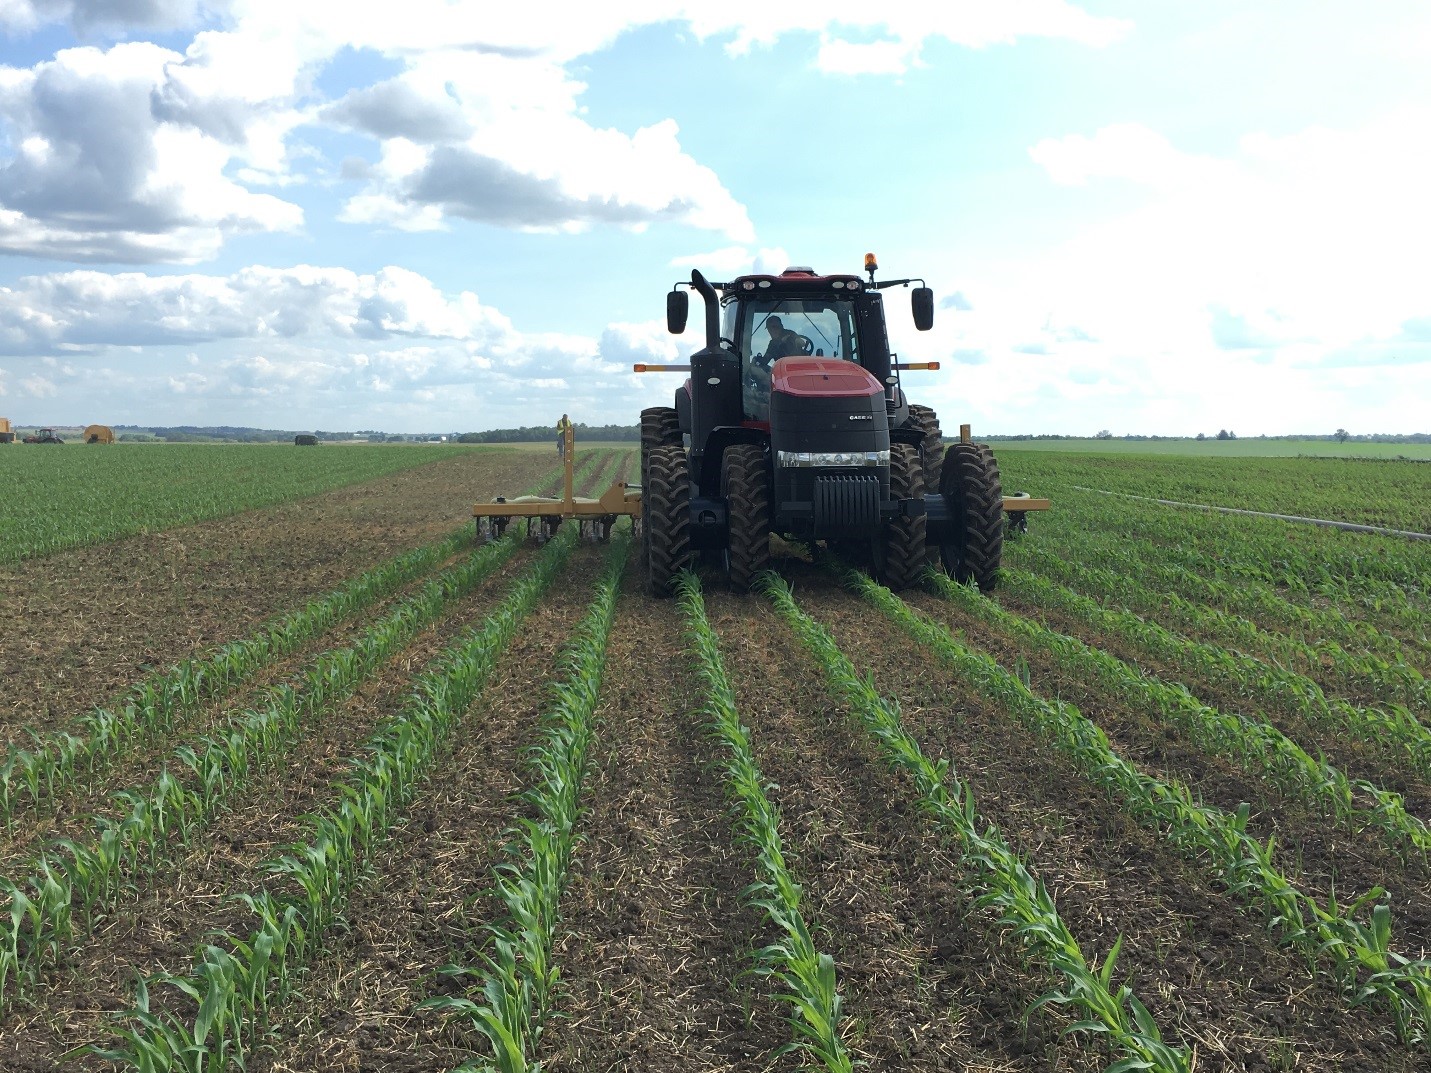 Manure being applied in the corn field, using a drag-hose system.